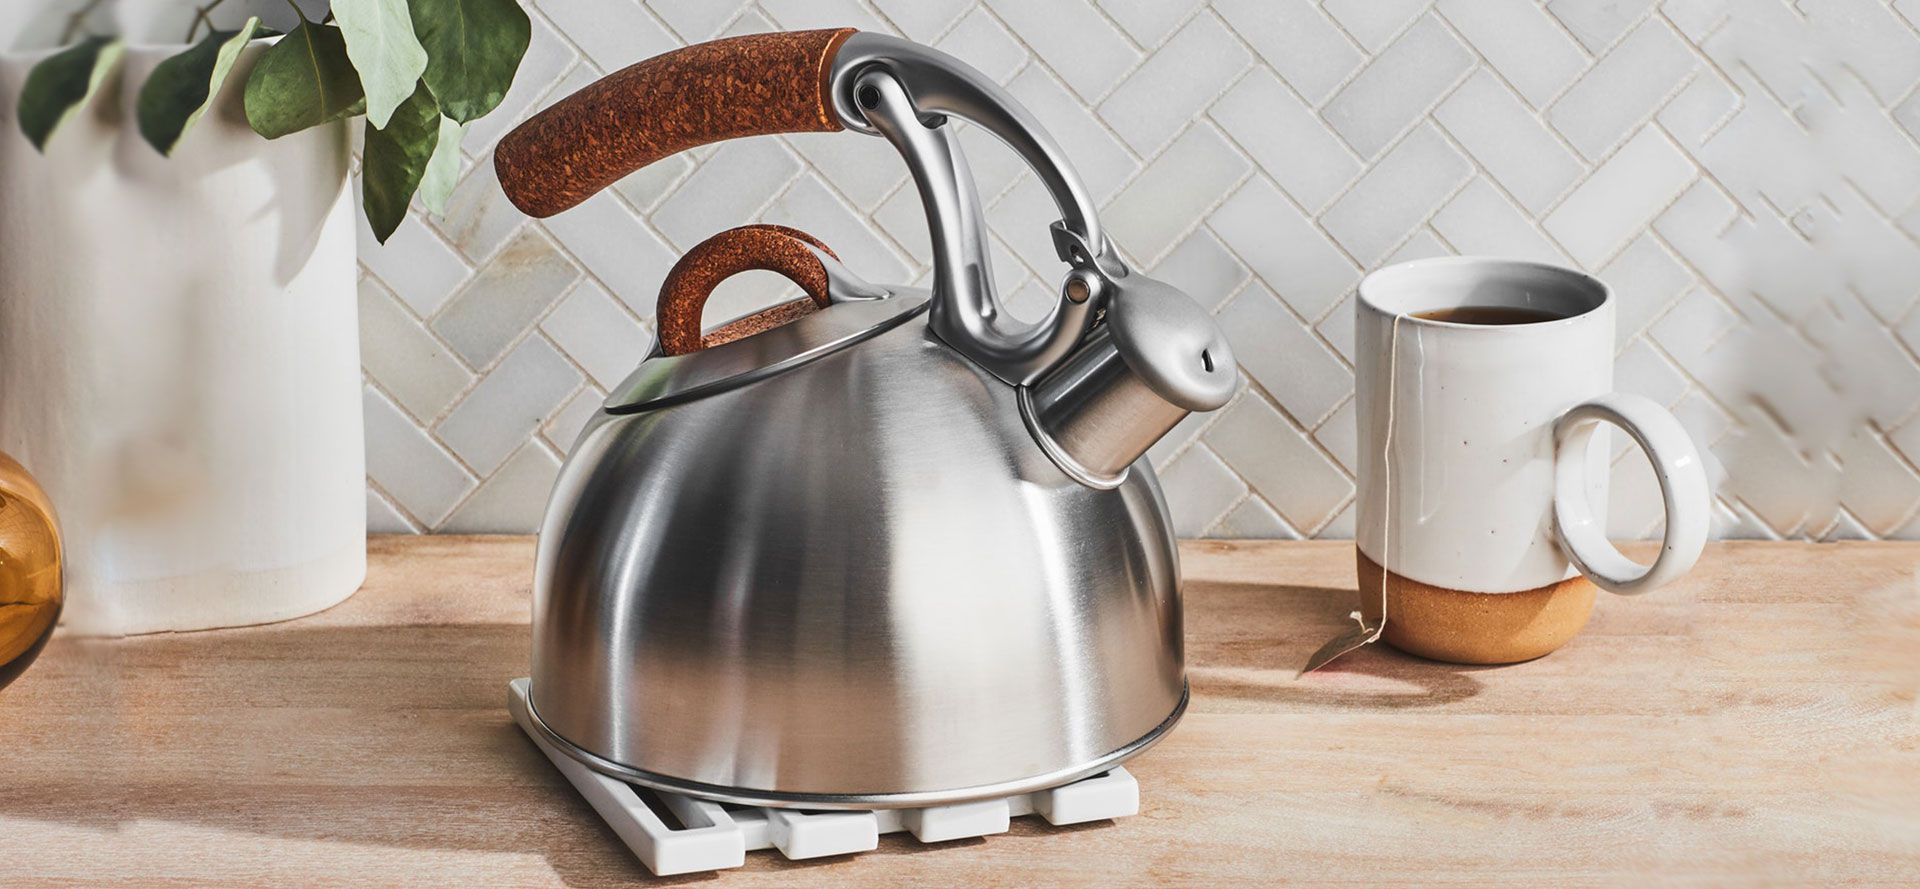 Stainless Steel Kettle.